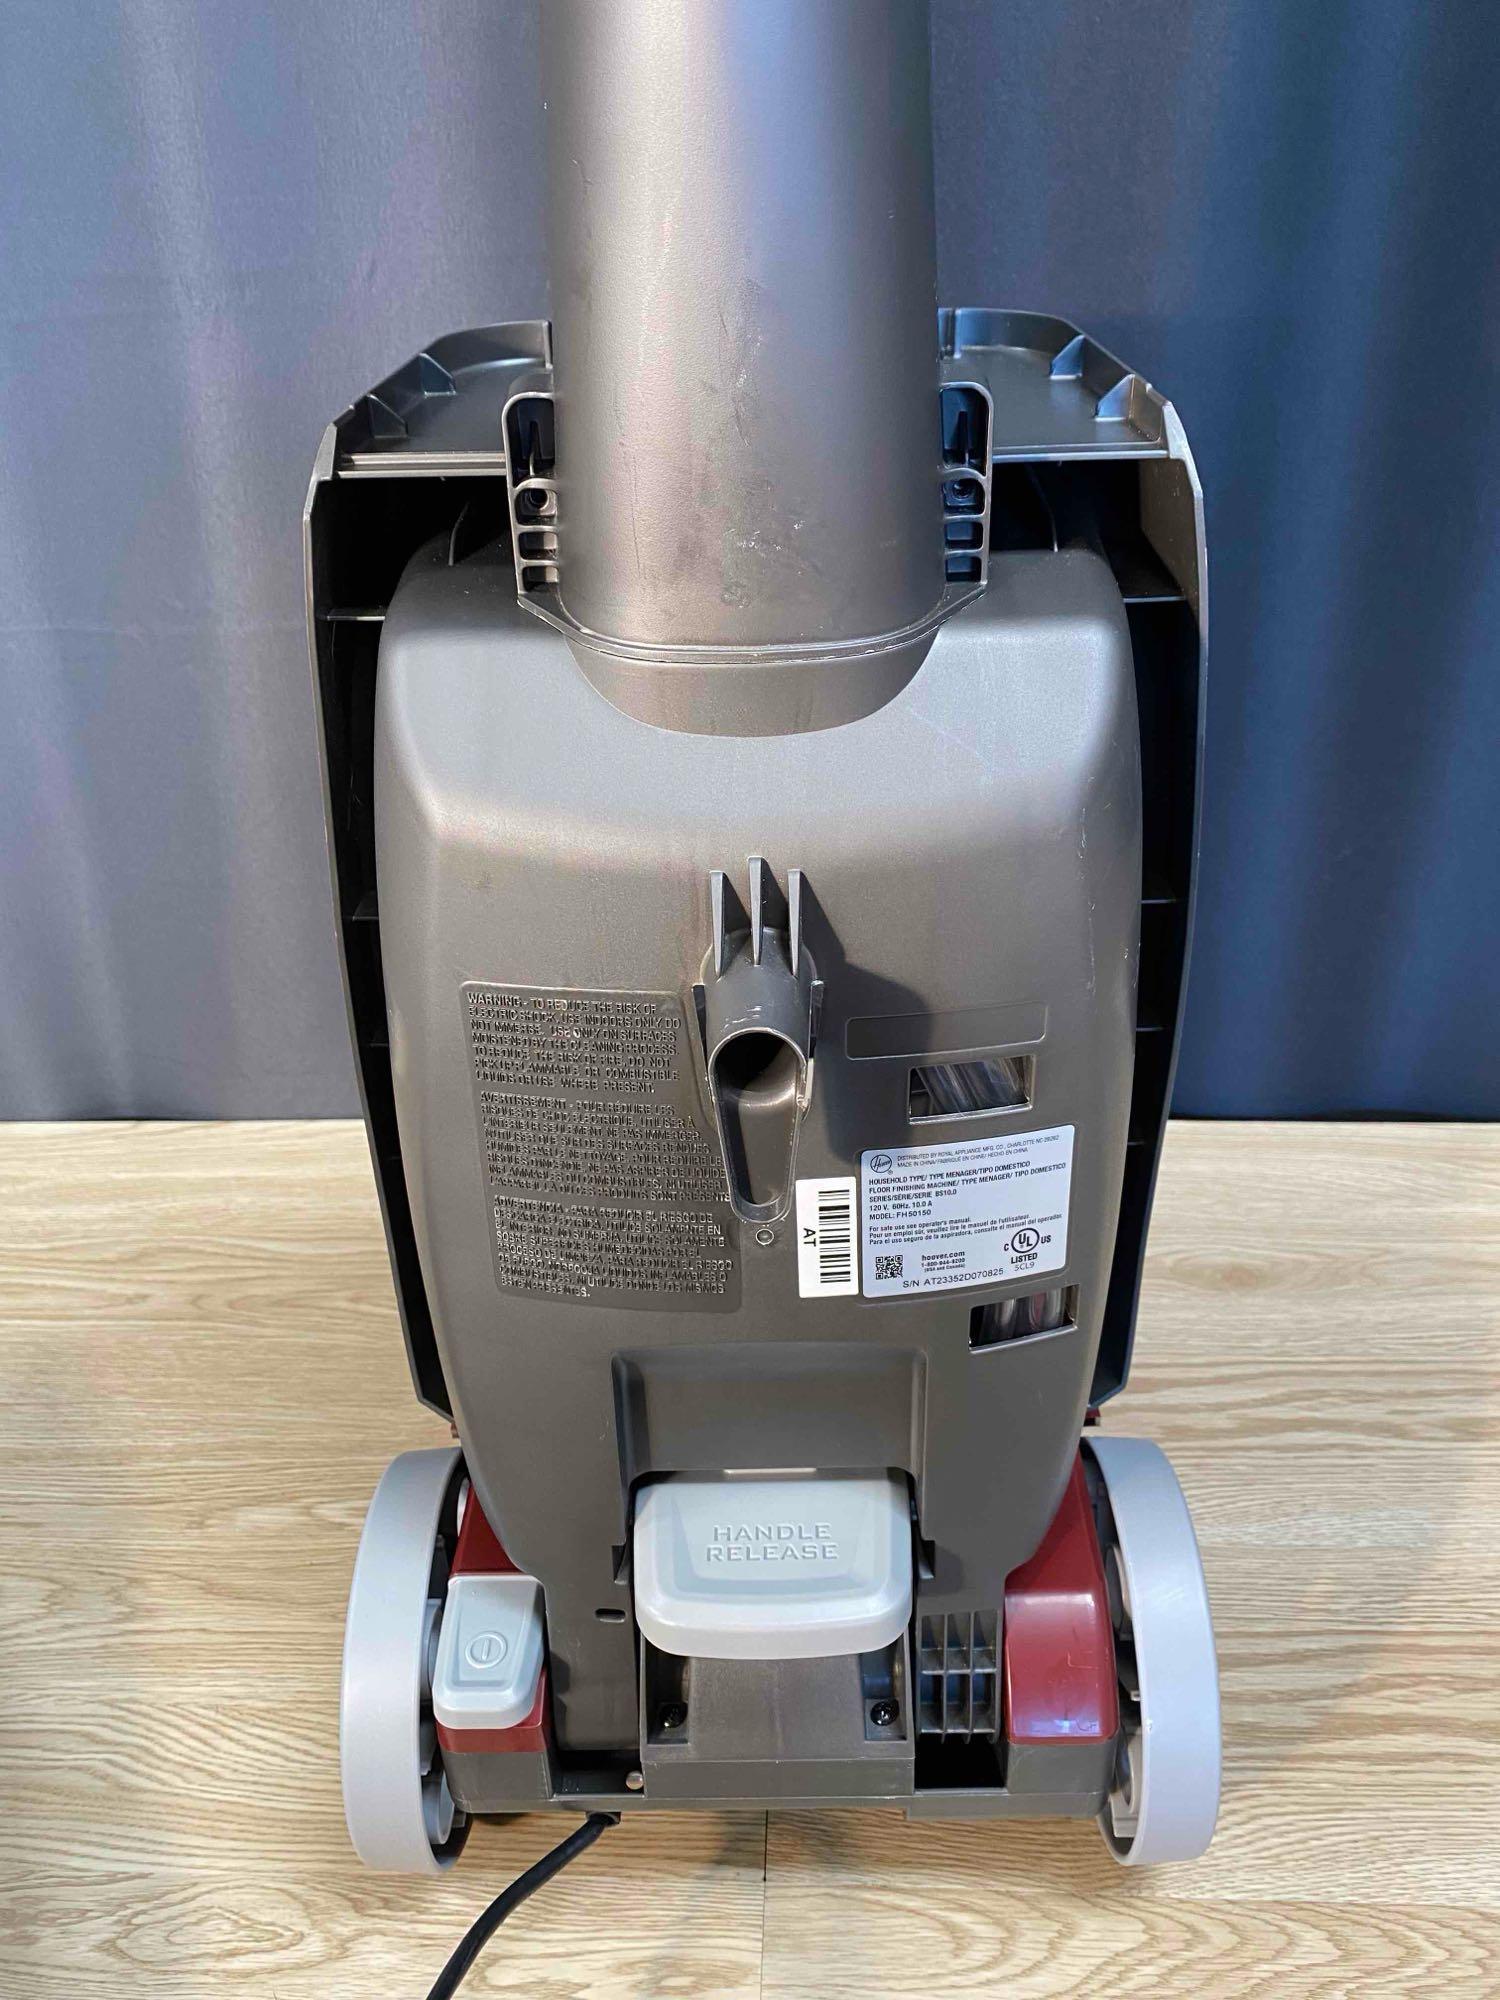 Hoover Power Scrub Deluxe Carpet Cleaner Machine